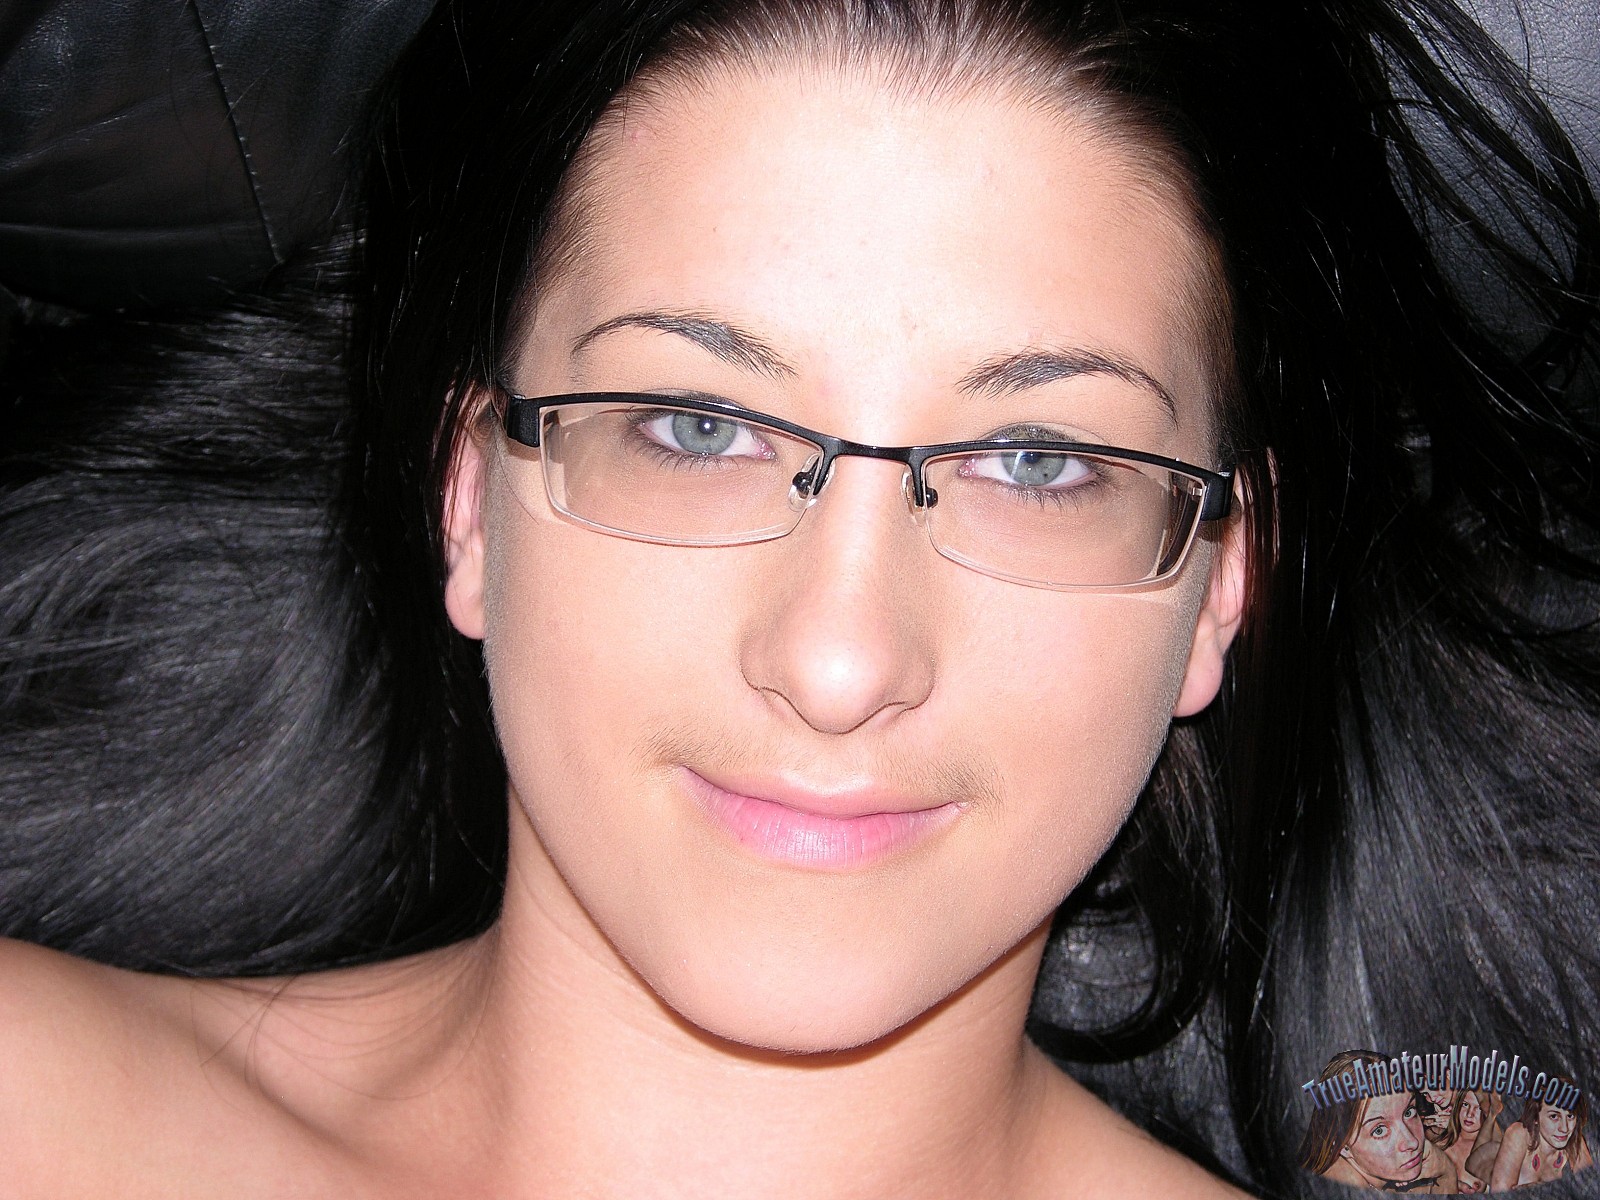 Sexy Girls wearing Glasses Page 286 Freeones Forum photo photo picture